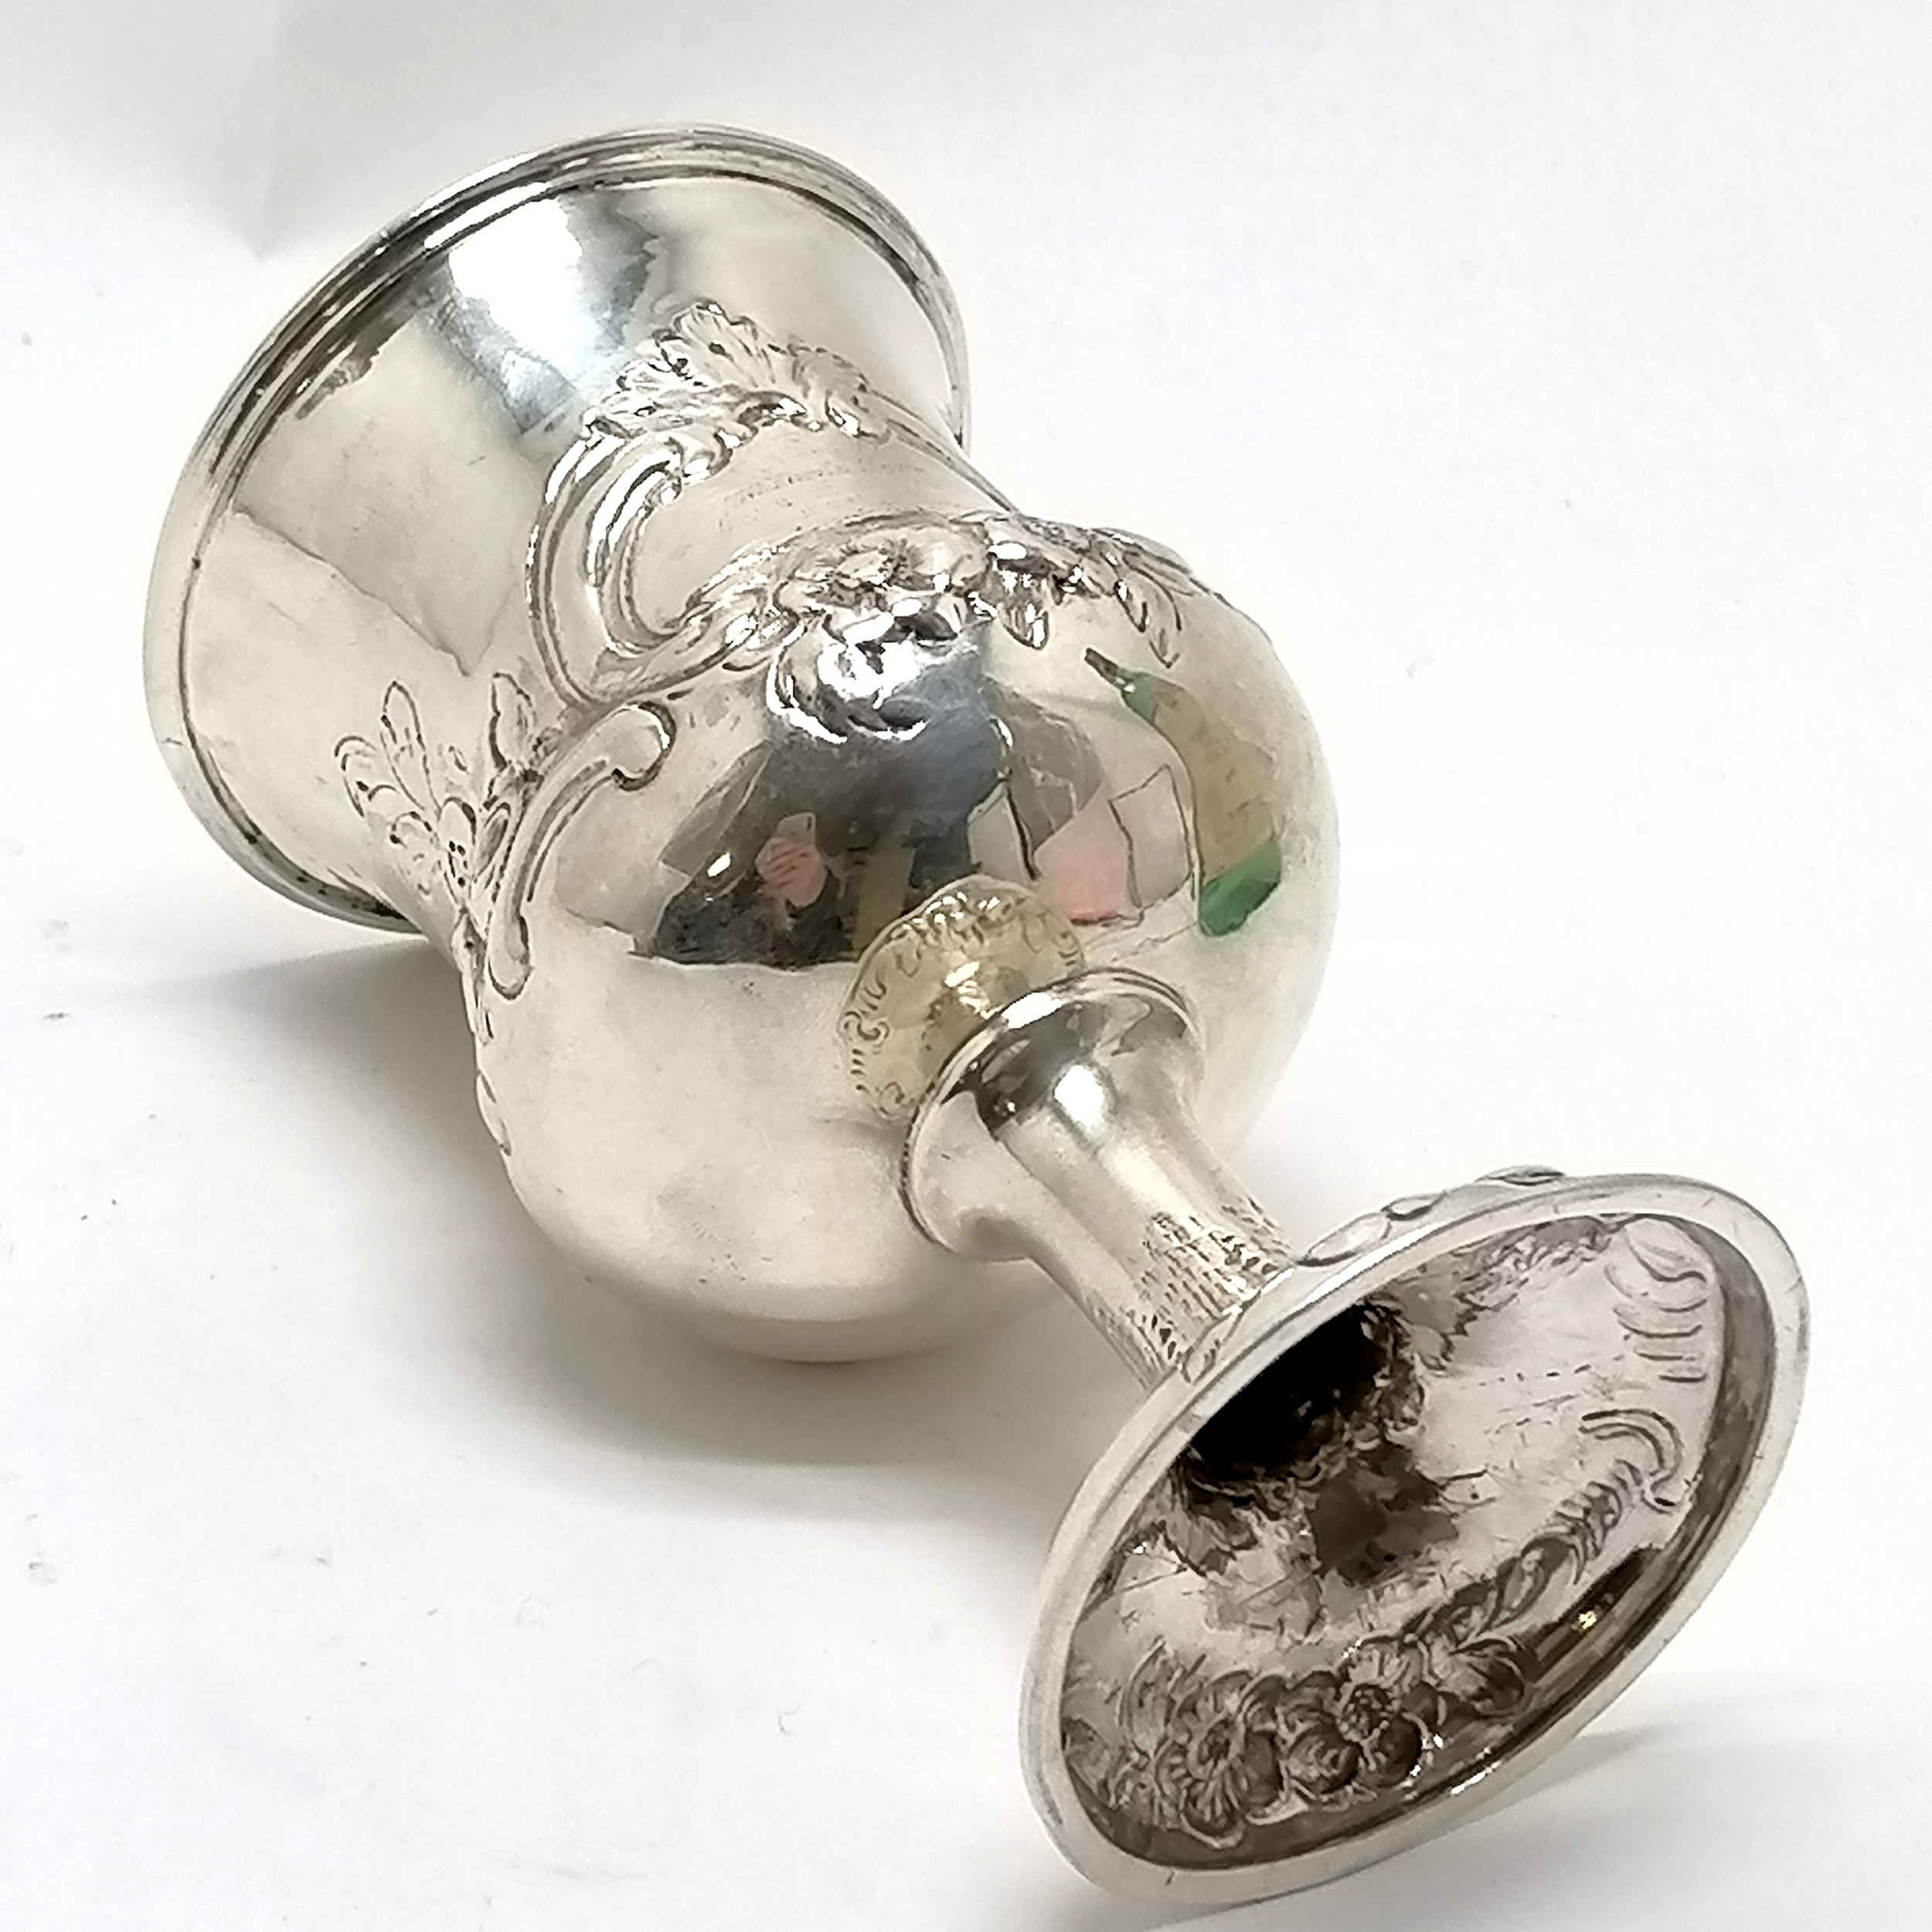 1863 silver goblet (with gilt interior) by Robert Harper (?) - 13cm & 97g total weight ~ has - Image 2 of 5